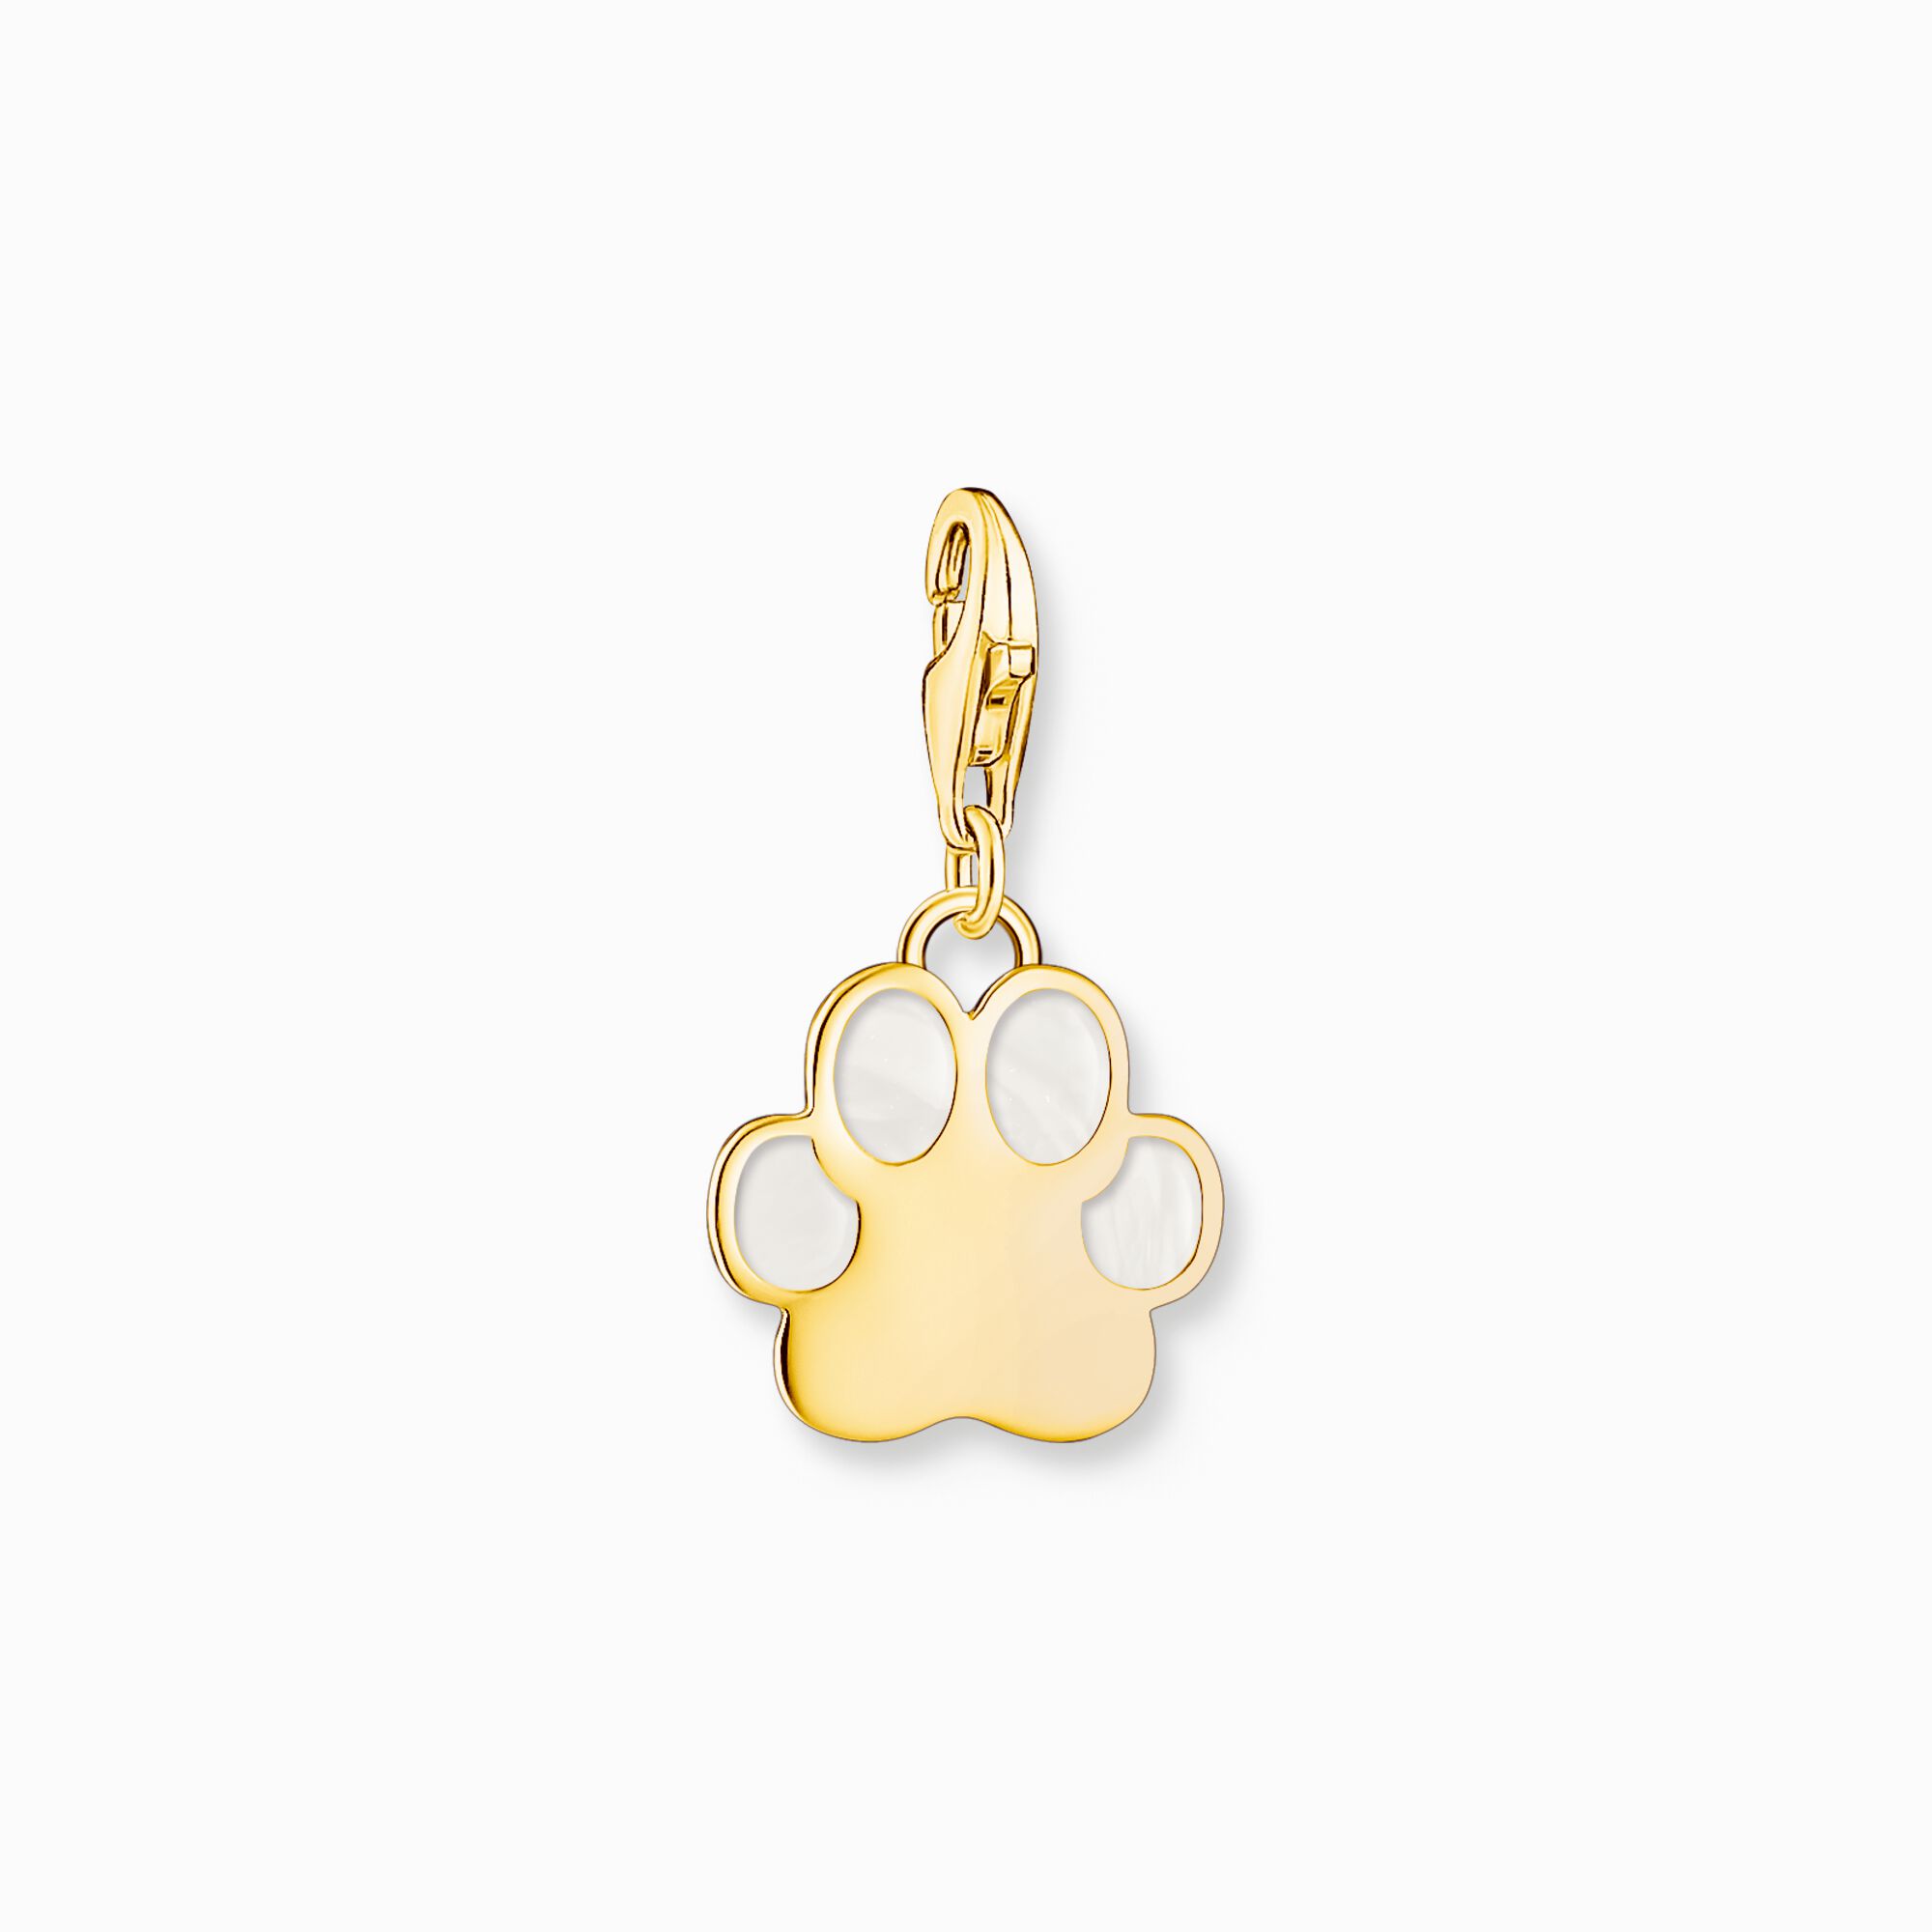 Charm pendant dog paw with cold enamel yellow-gold plated from the Charm Club collection in the THOMAS SABO online store